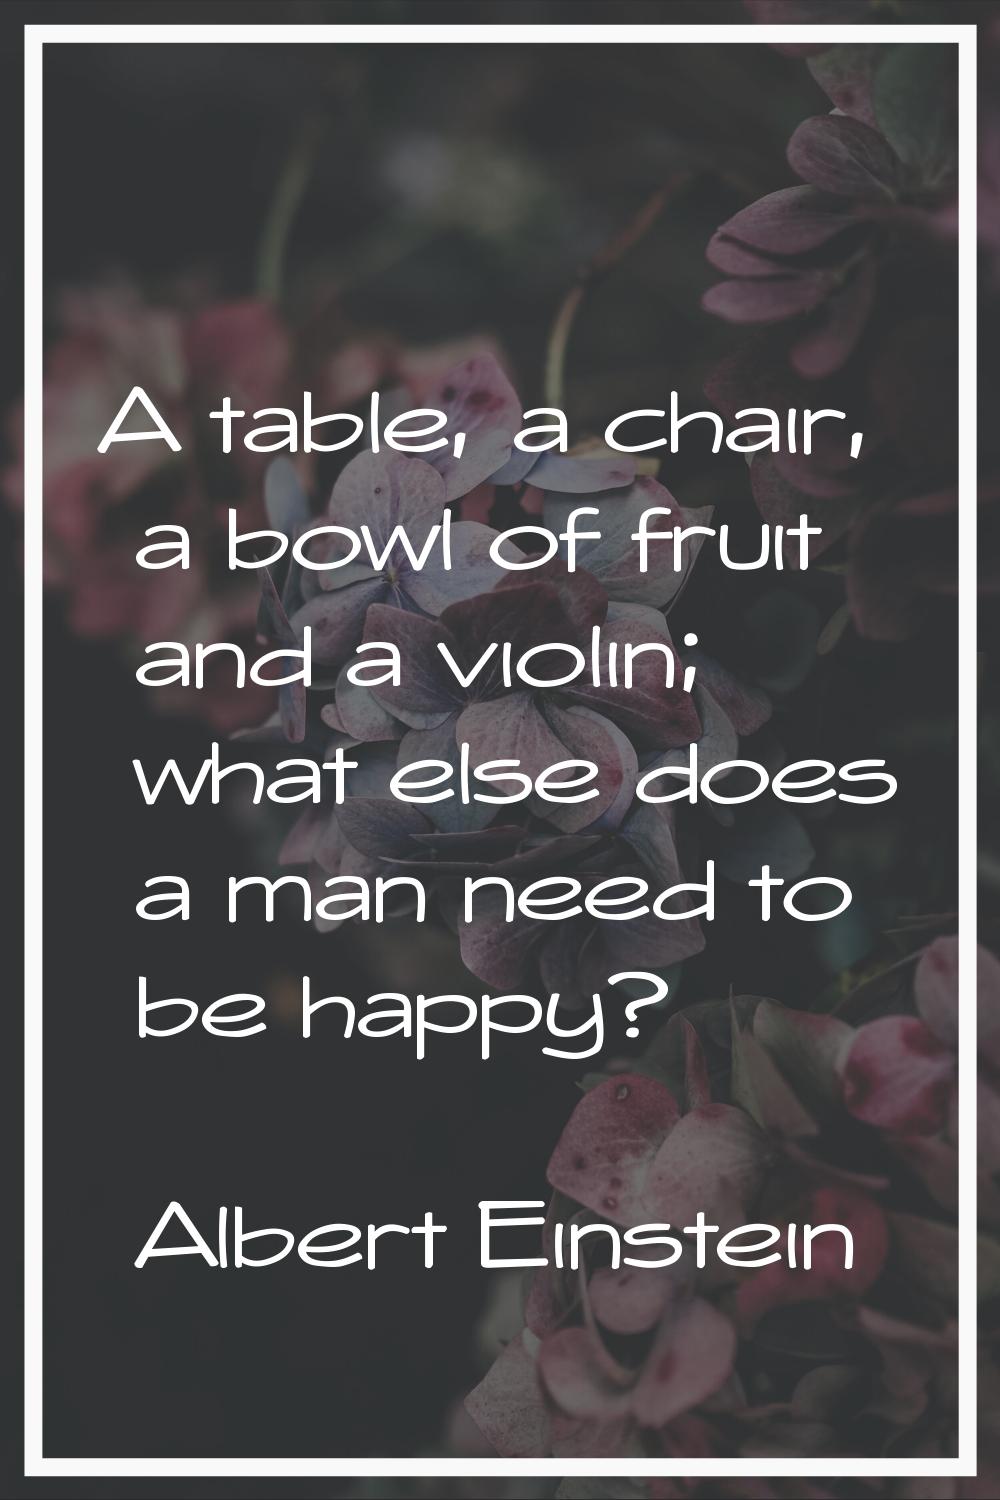 A table, a chair, a bowl of fruit and a violin; what else does a man need to be happy?